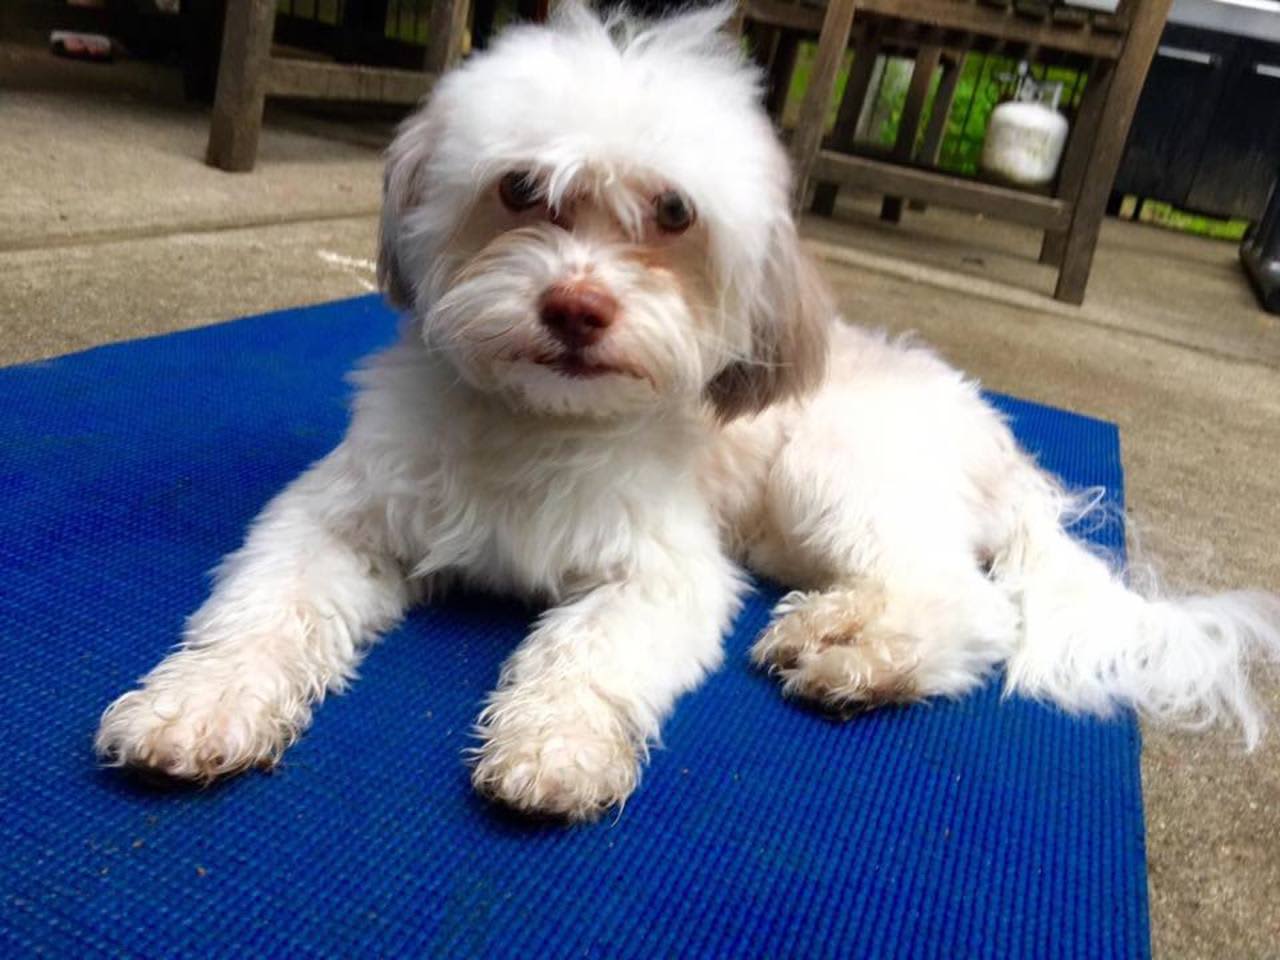 Suffern police are aiding in the search for this lost dog, a seven-month old Havanese named Luna that was last seen on Wayne Avenue.